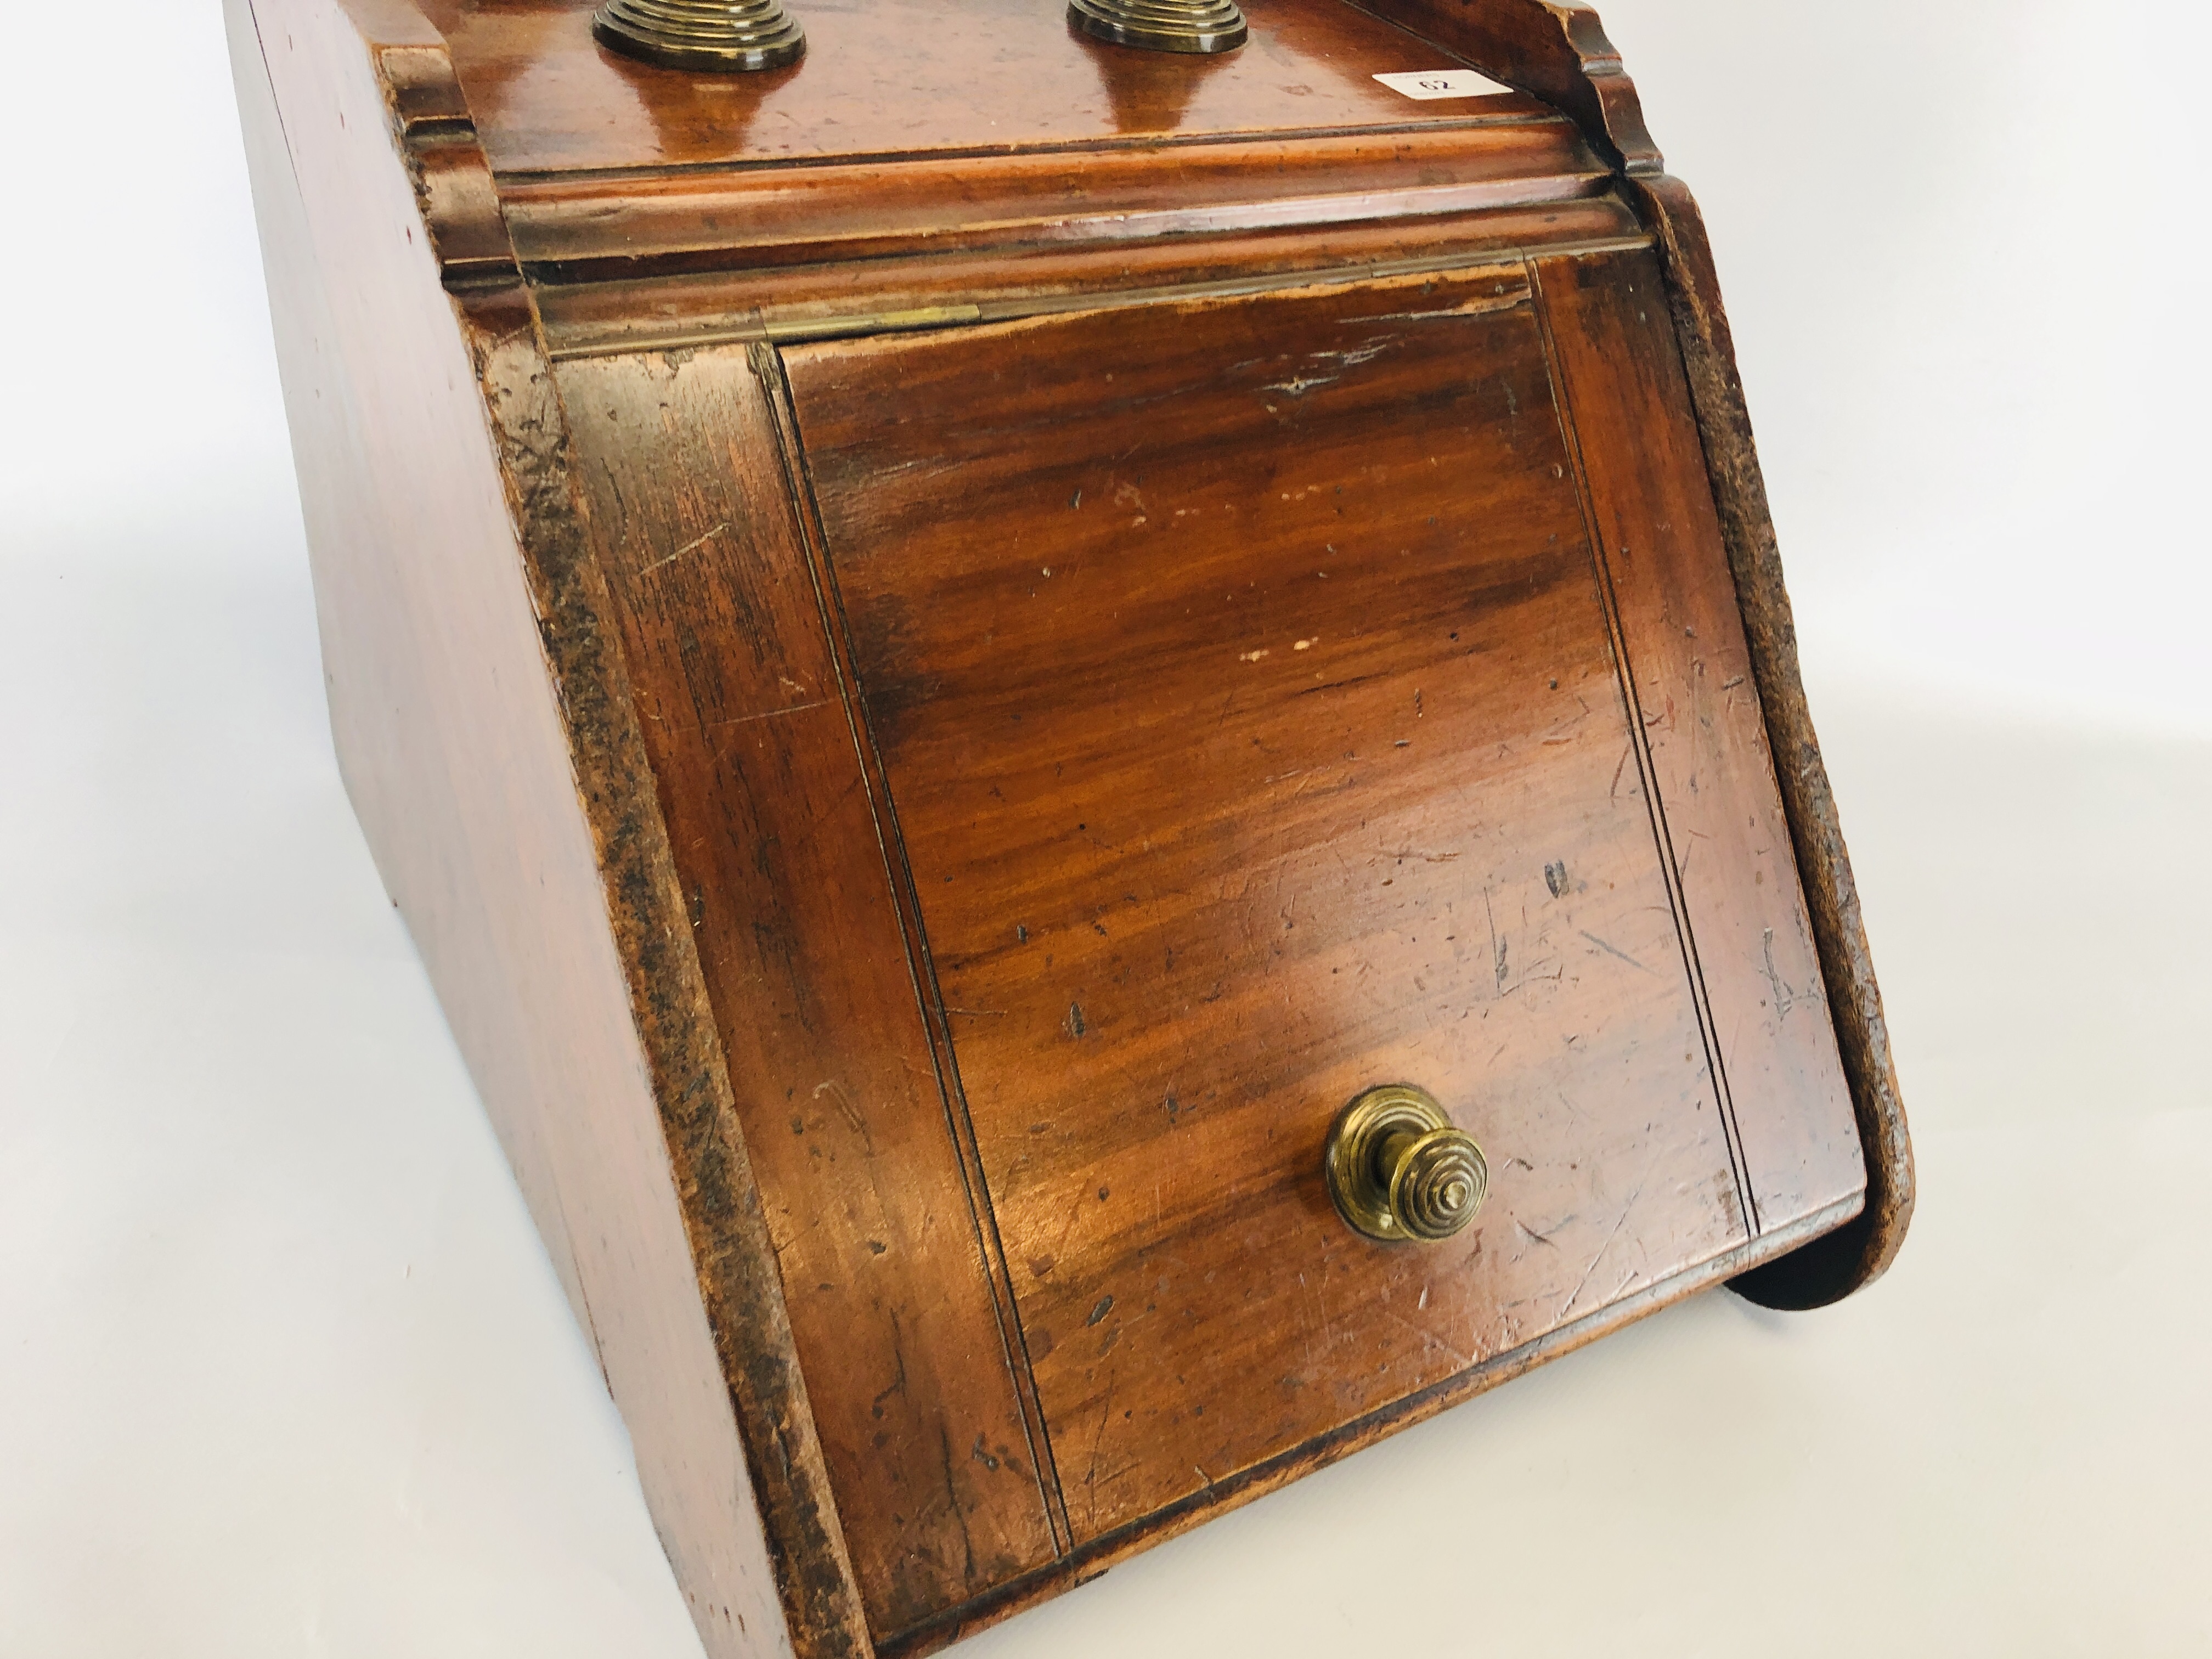 ANTIQUE EDWARDIAN MAHOGANY AND BRASS COAL BOX WITH BELLOWS. - Image 3 of 7